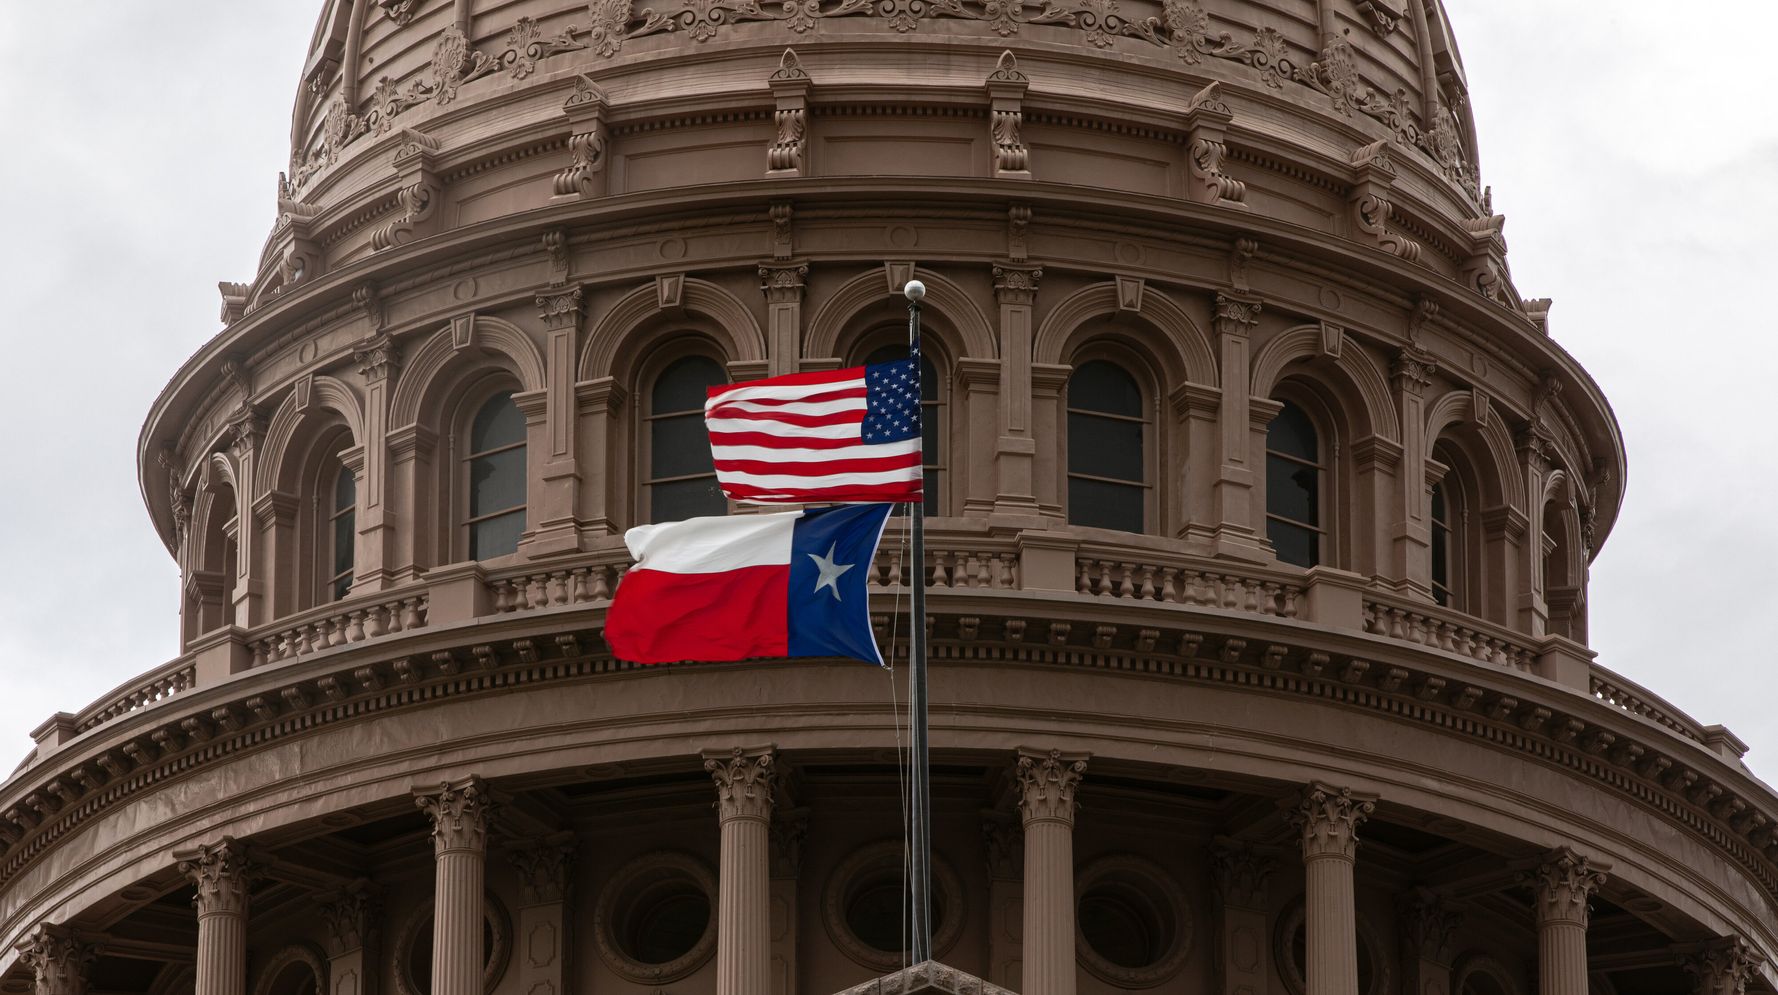 Texas Democrats To Leave State In Effort To Block Restrictive Voting Laws